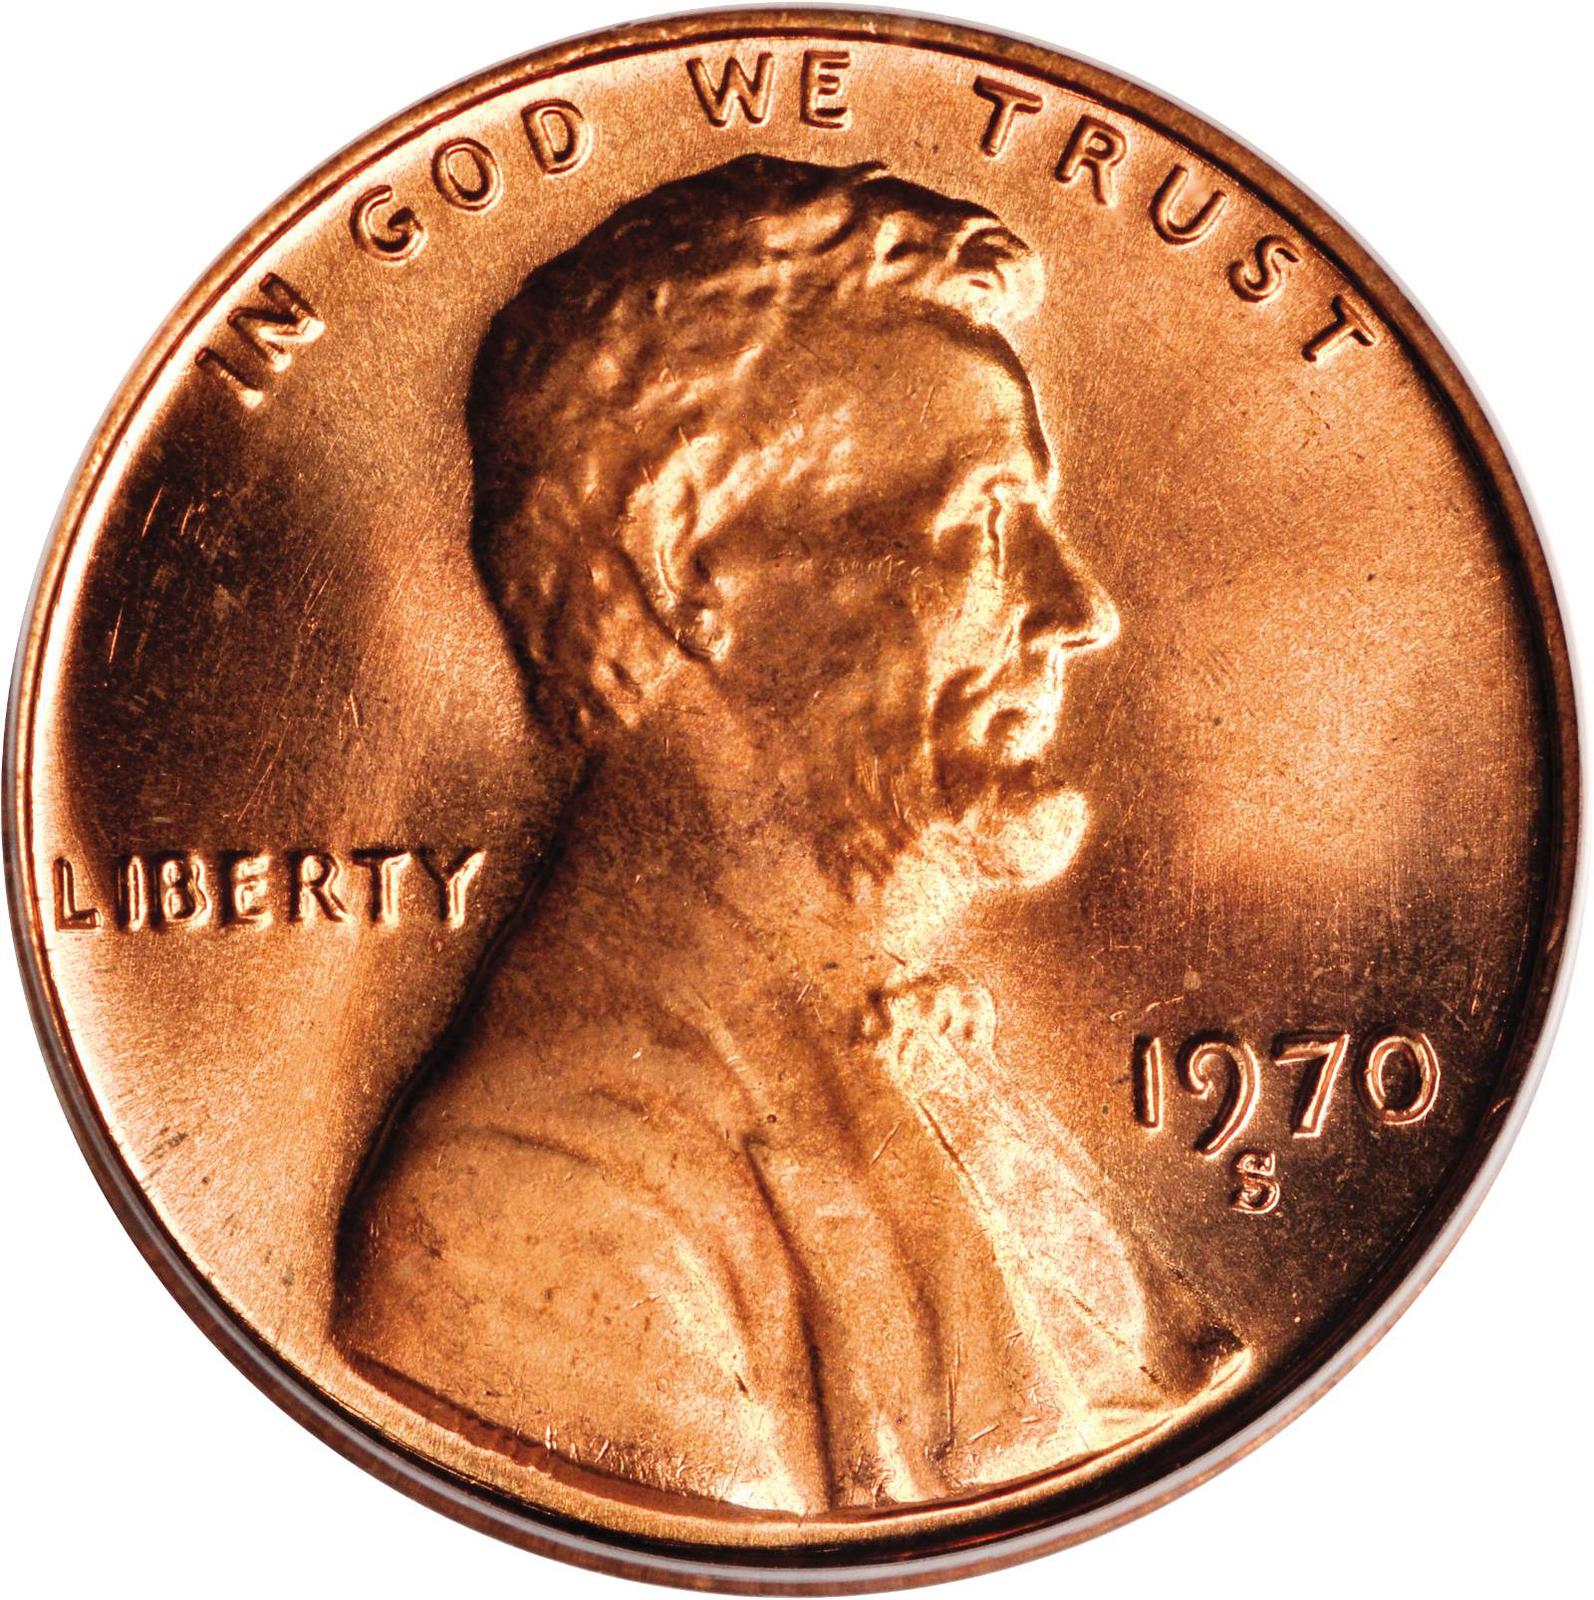 1970-S LD  LARGE DATE LOW 7 LINCOLN MEMORIAL CENT MINT STATE BU PENNY 